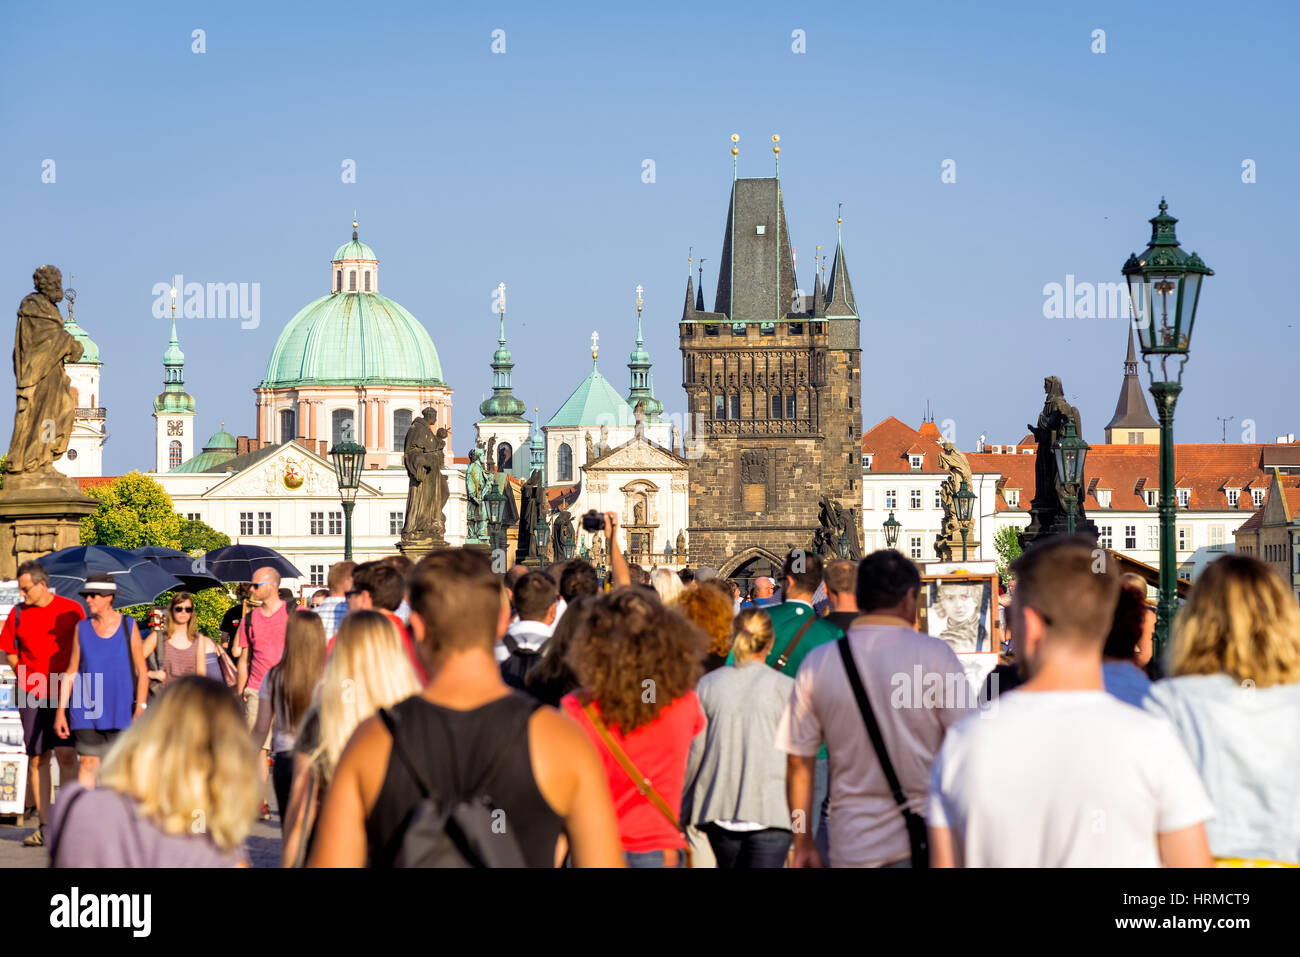 PRAGUE, CZECH REPUBLIC - SEPTEMBER 07, 2016: Bustling crowd at Charles Bridge (Karluv most) facing the old town. Stock Photo